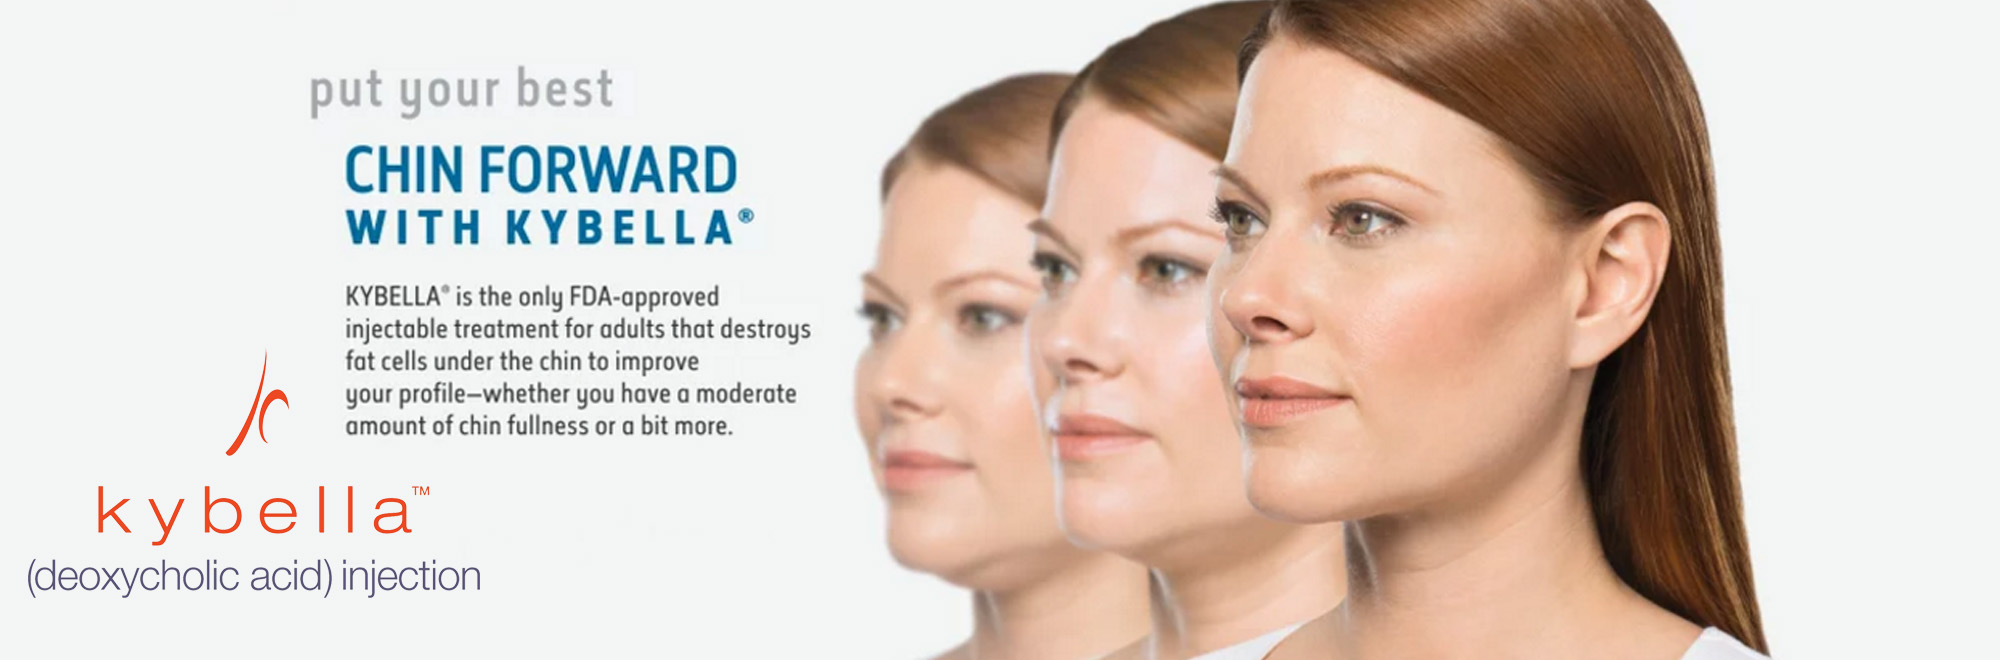 Kybella infographic